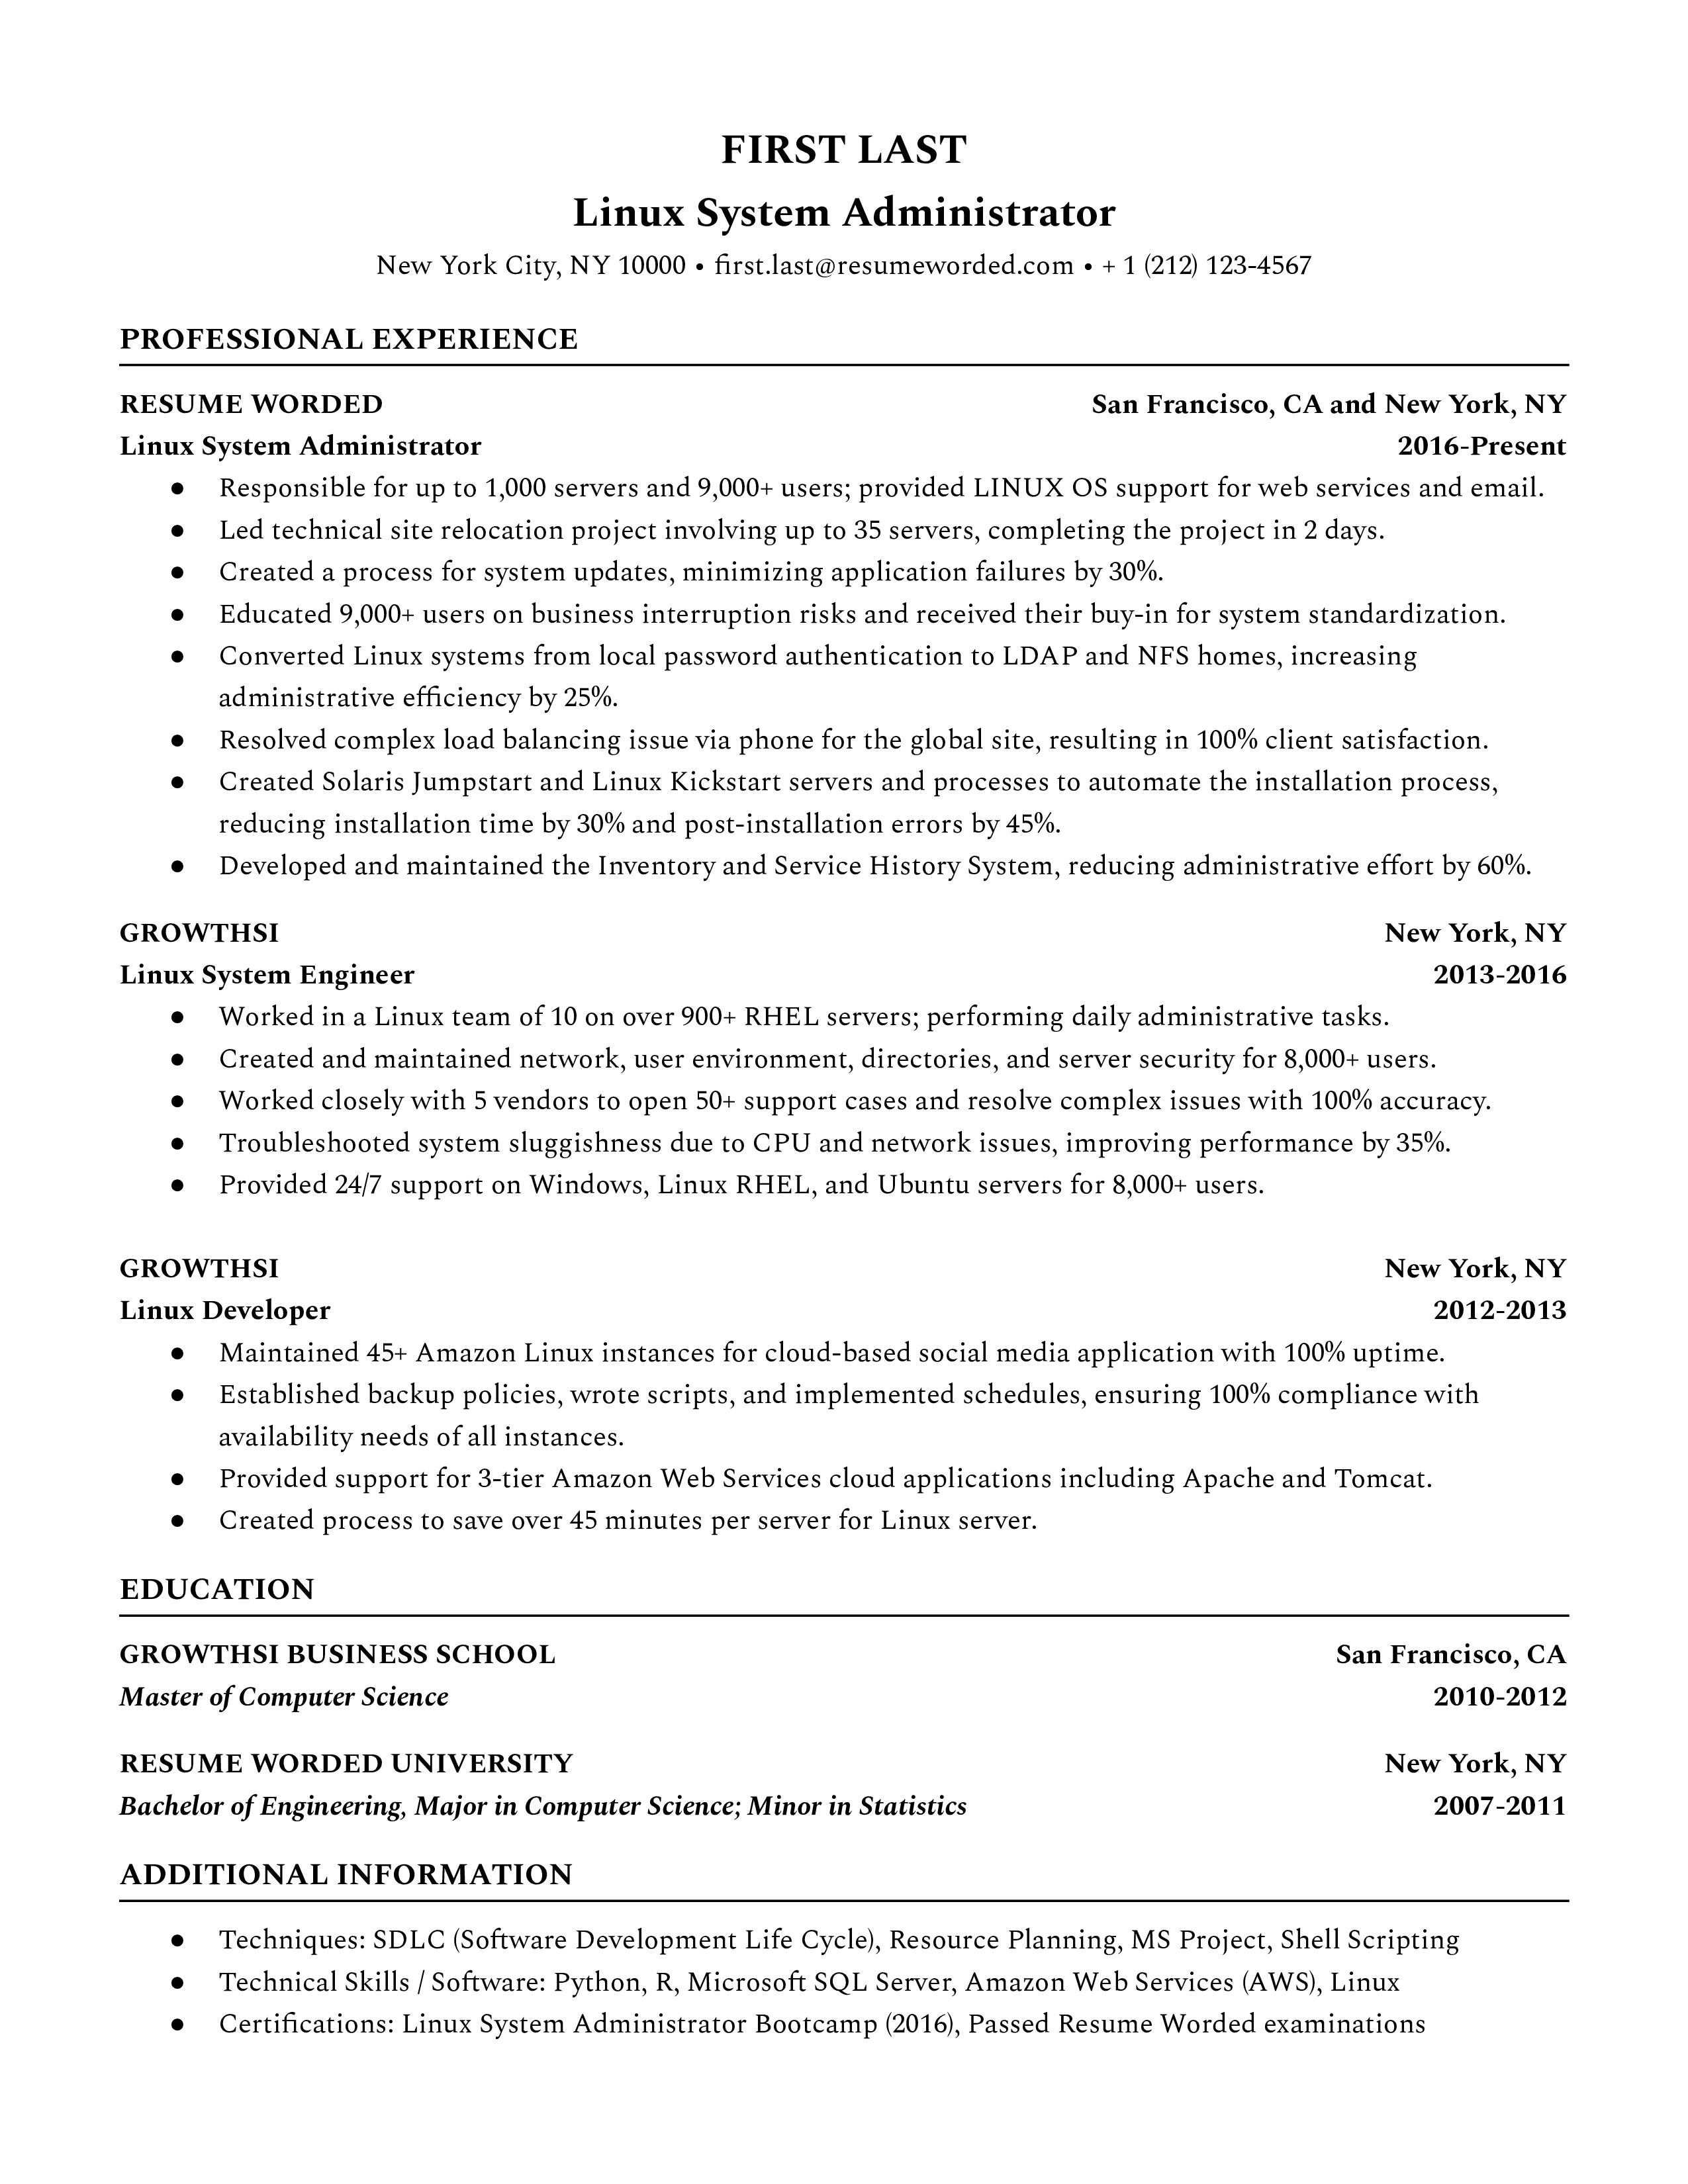 Linux System Administrator resume highlighting tools, distributions, and certifications.